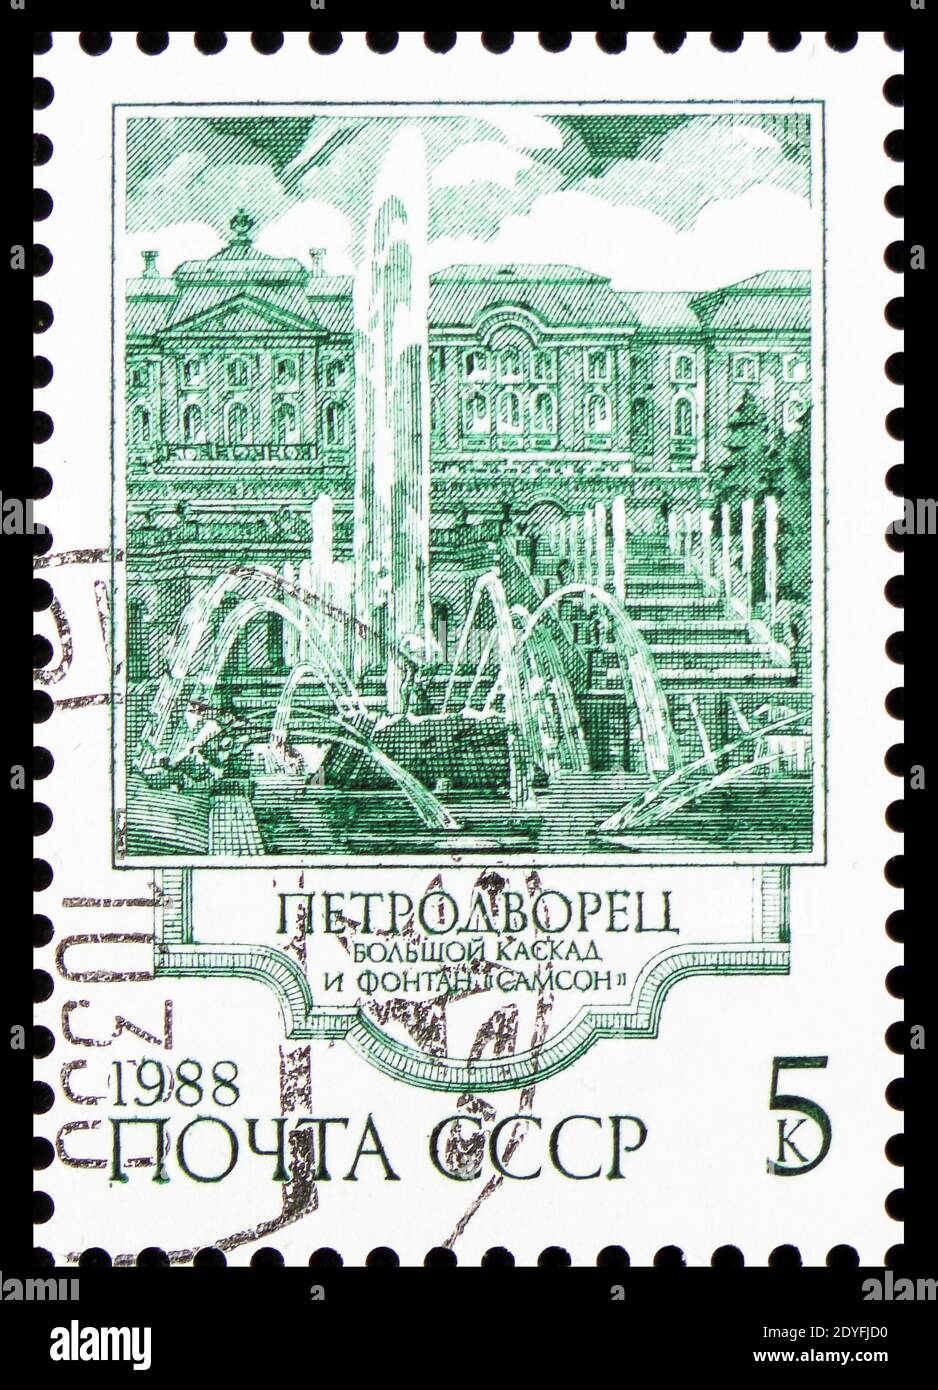 MOSCOW, RUSSIA - MAY 25, 2019: Postage stamp printed in Soviet Union shows Samson Fountain, Fountains of Petrodvorets serie, circa 1988 Stock Photo